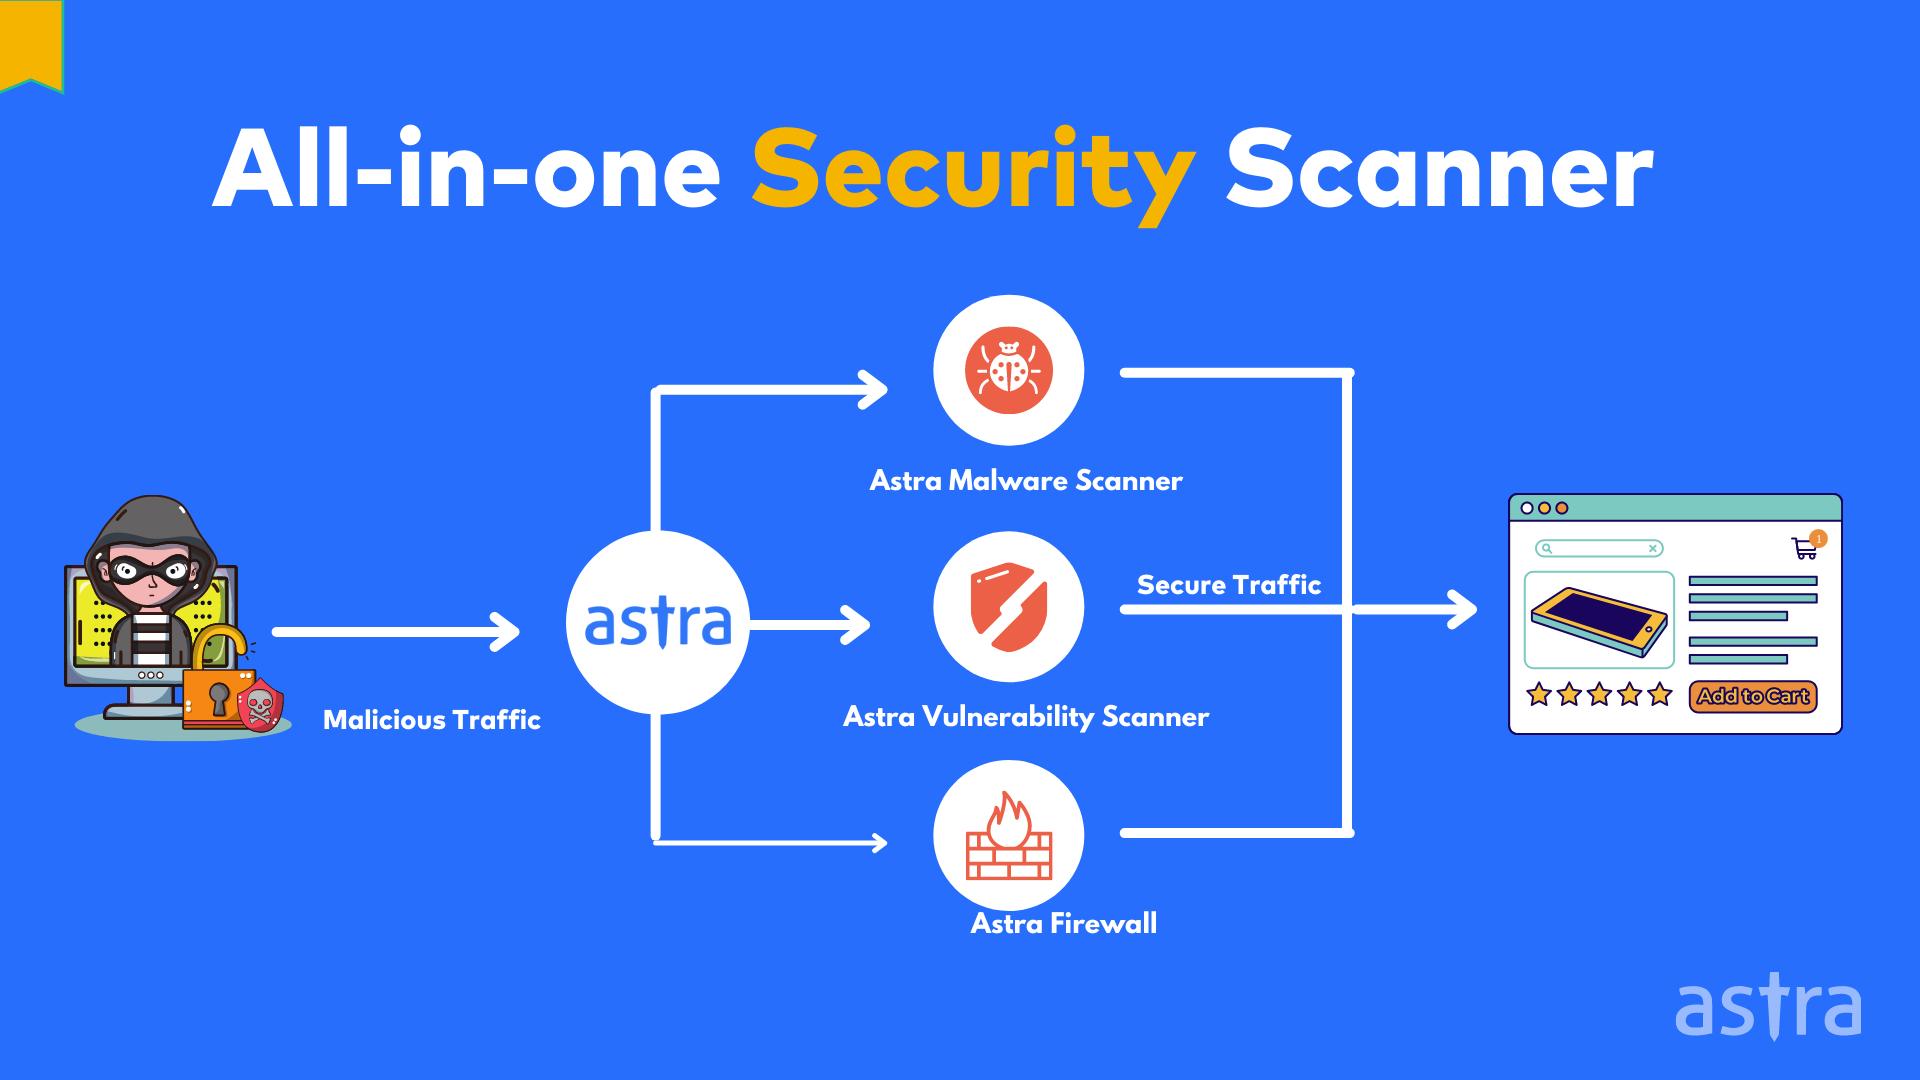 Astra's Security Solution